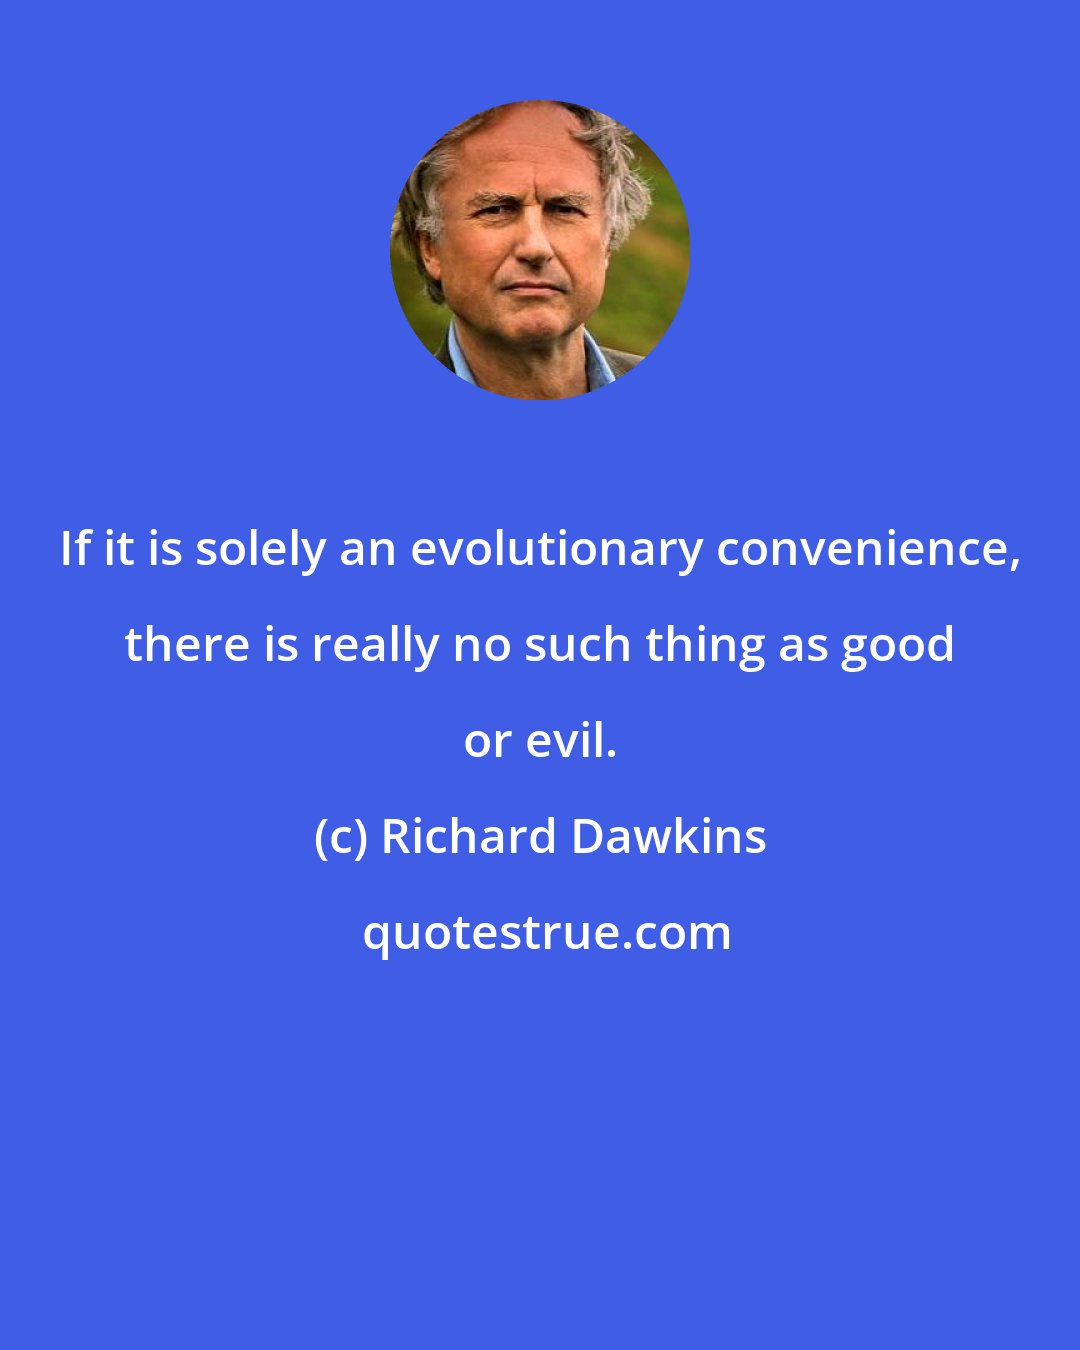 Richard Dawkins: If it is solely an evolutionary convenience, there is really no such thing as good or evil.